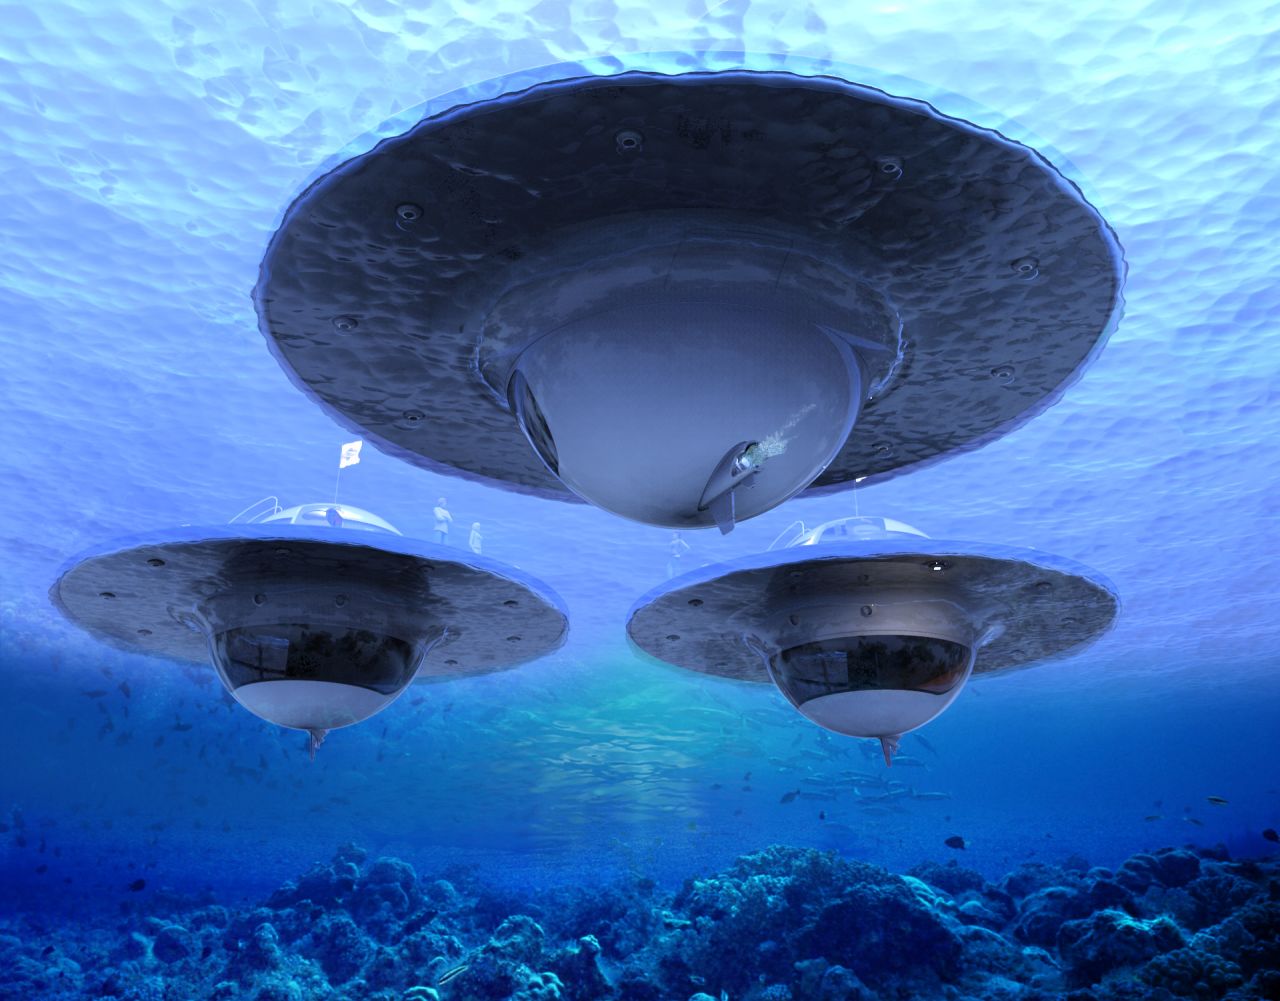 Don't worry: these are not a figment of your imagination. Made of two fiberglass shells, the UFO (which in this case, stands for unidentified floating object) is essentially what it looks like -- a spherical boat, able to reach a top speed of 3-5 knots.